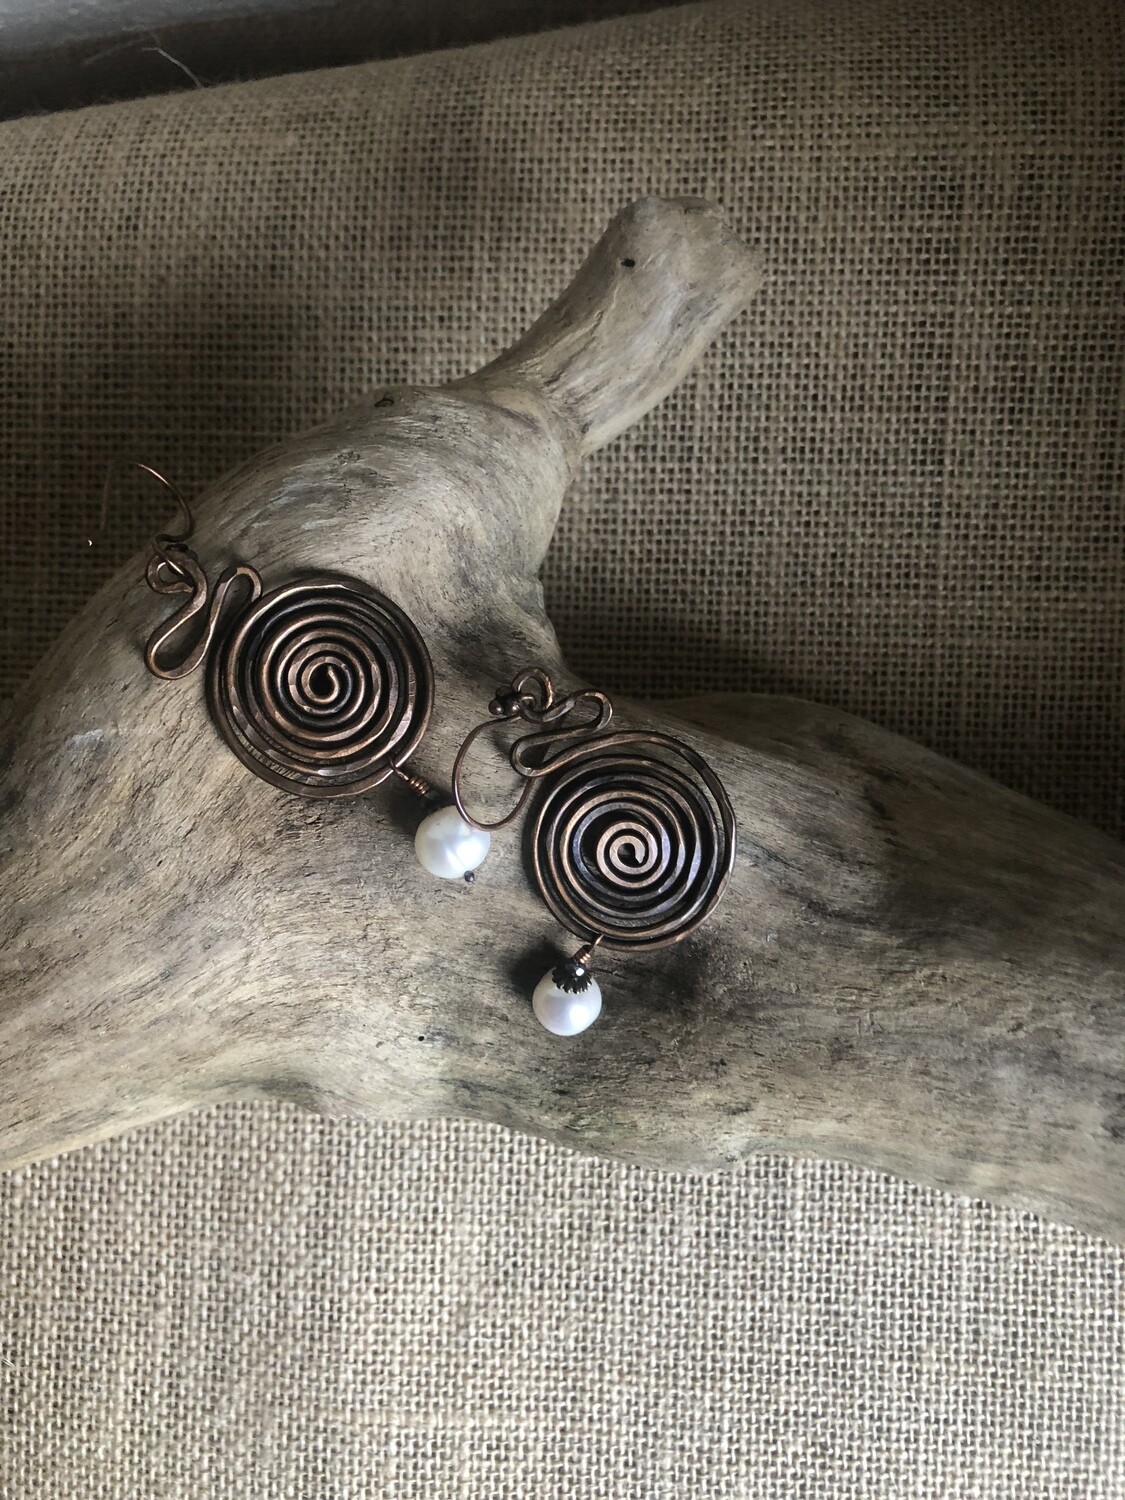 Copper spirals and baroque pearls